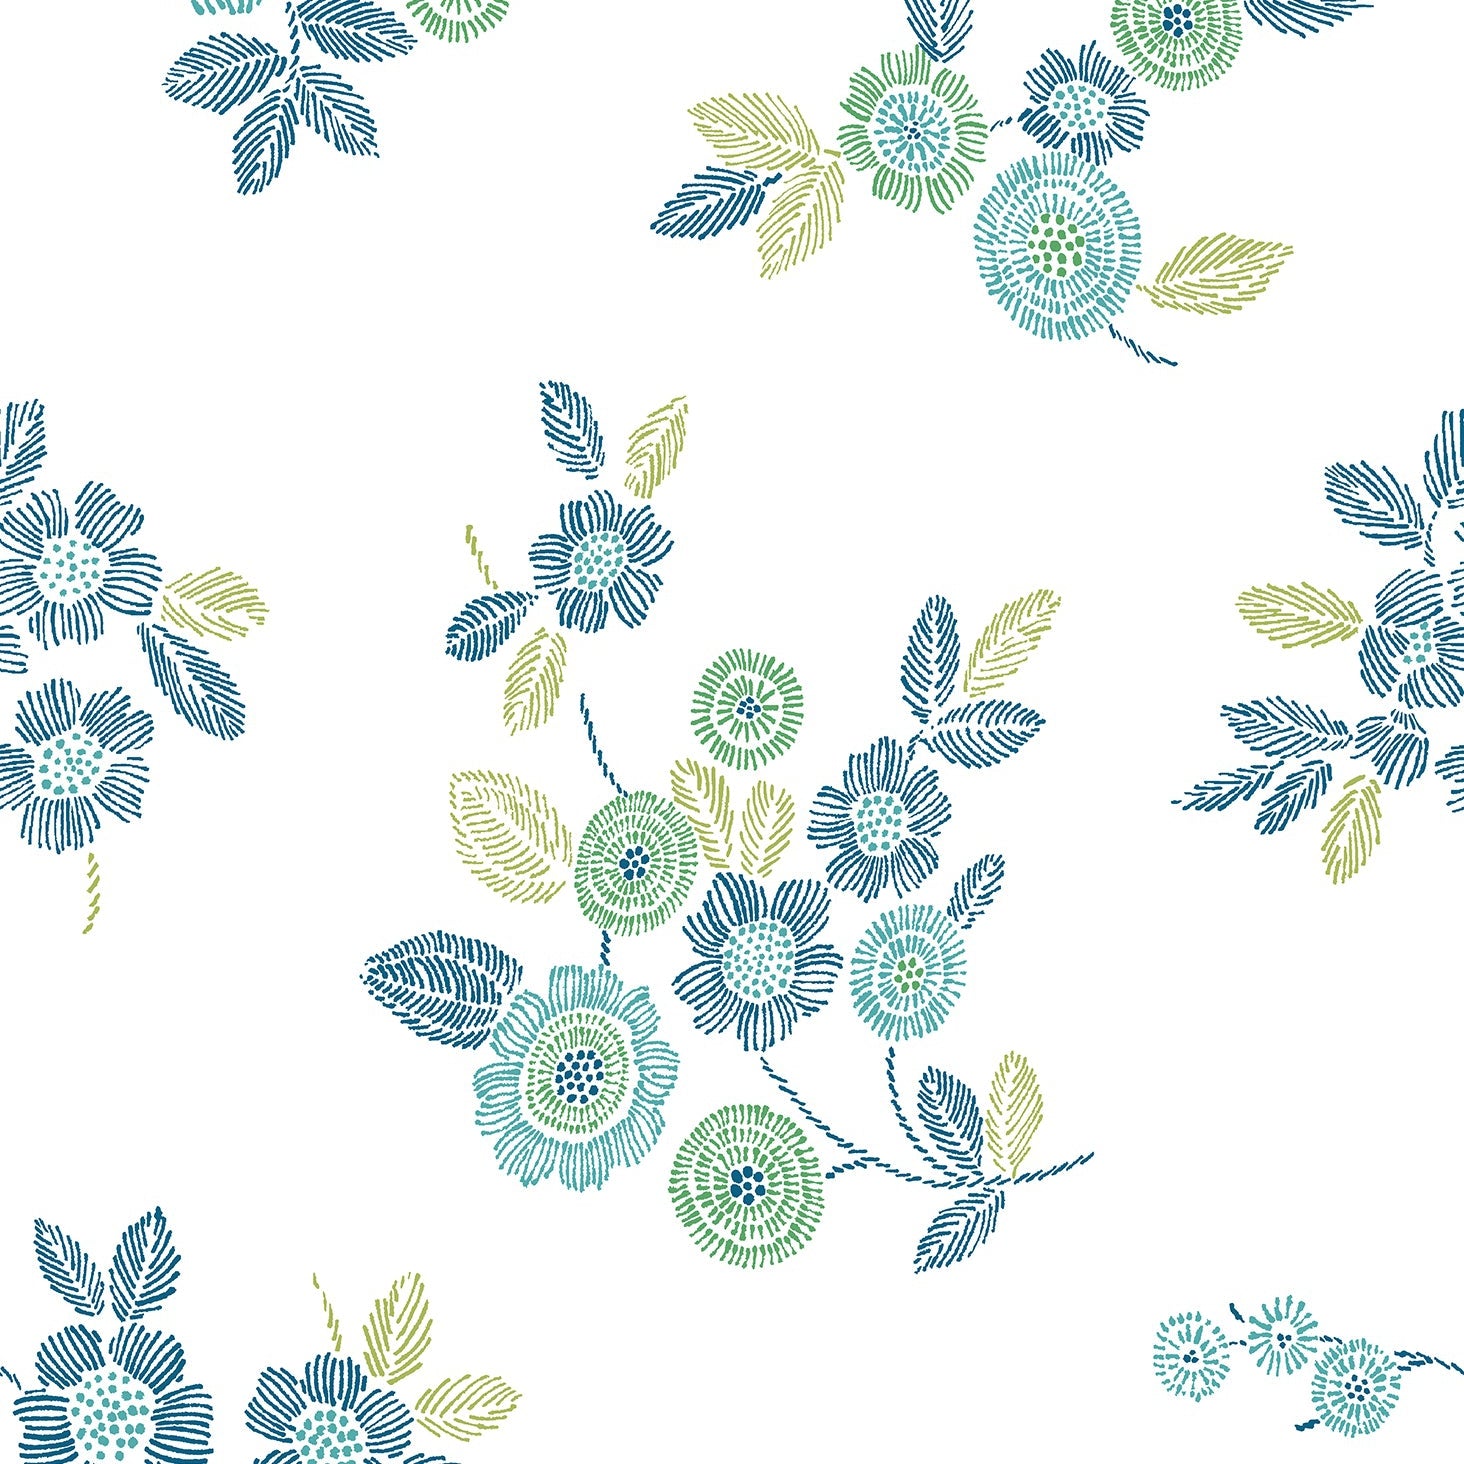 Looking for 2744-24127 Solstice Green Flowers A-Street Prints Wallpaper